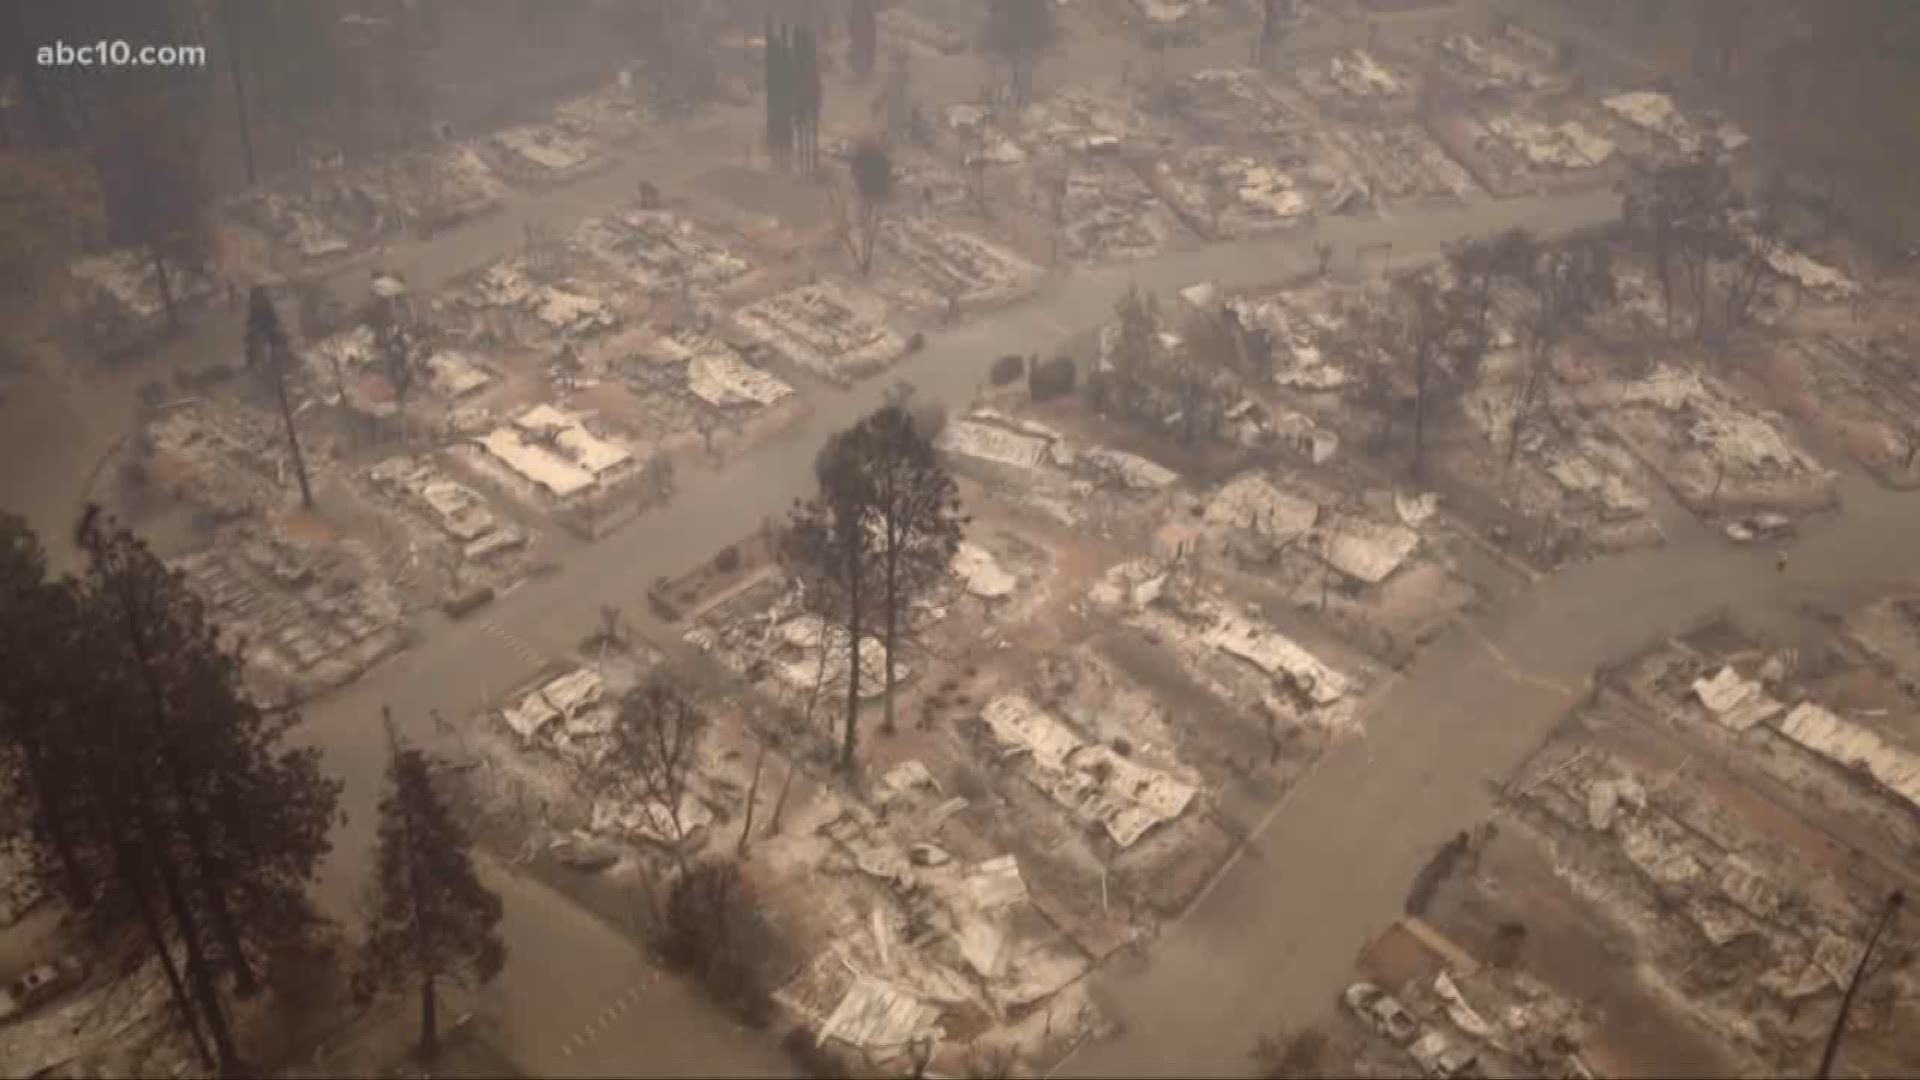 Firefighters let ABC10 fly our drone over the devastation left by the Camp Fire in Paradise.